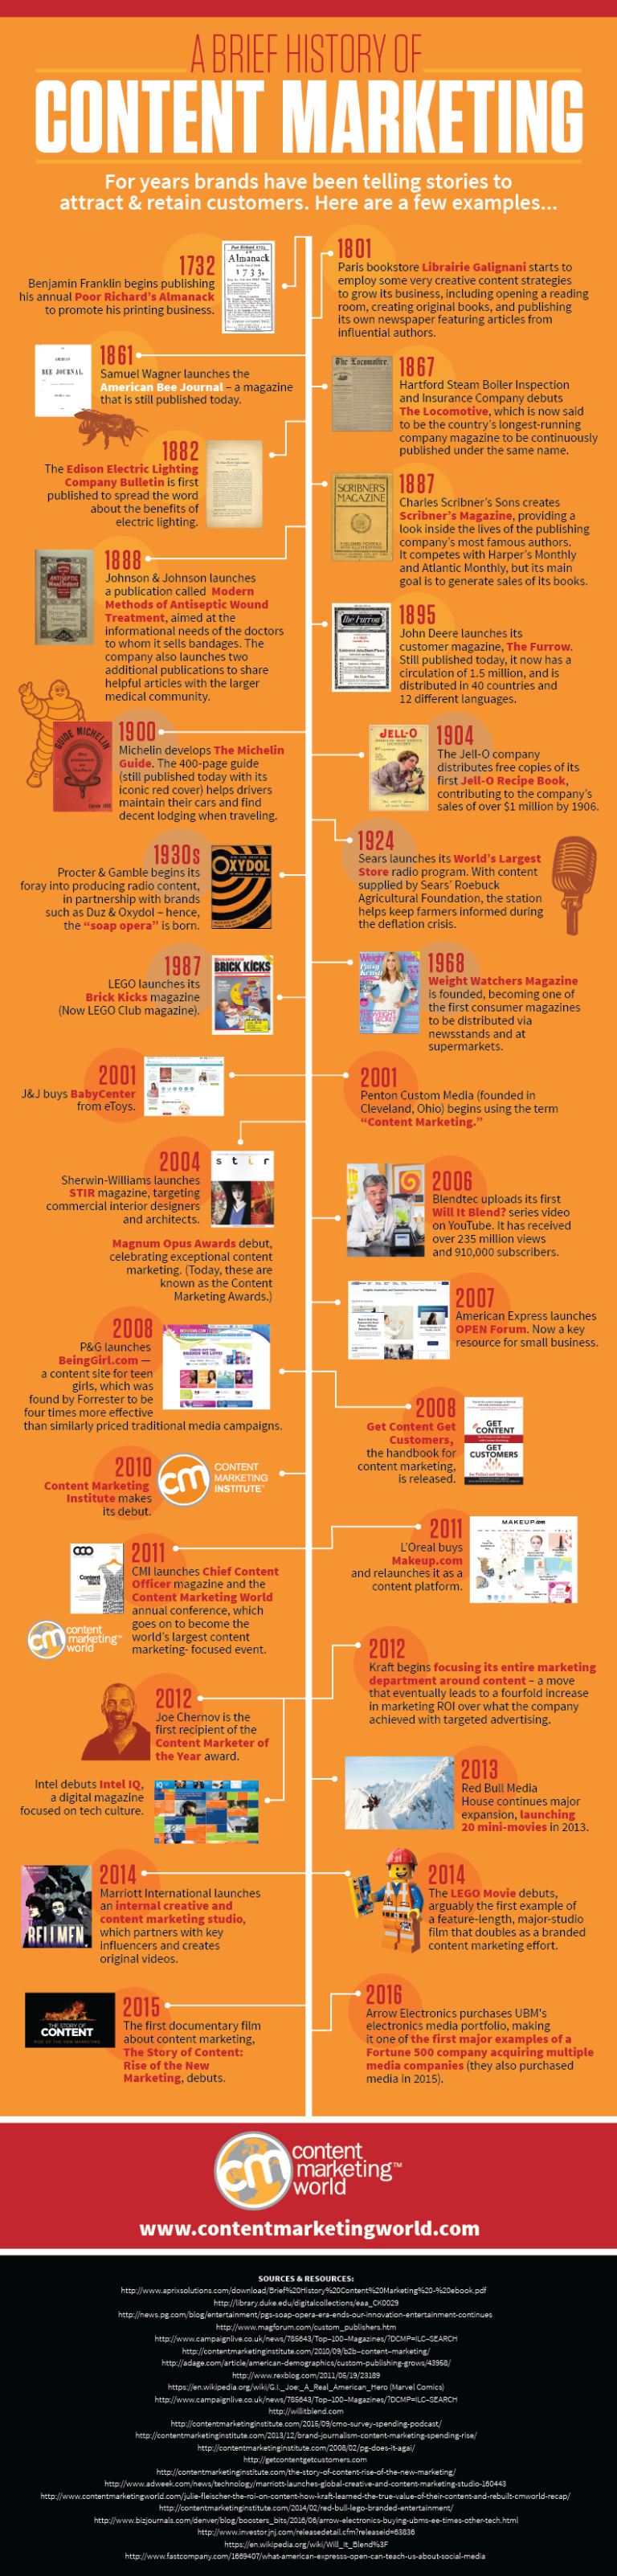 History-of-Content-Marketing